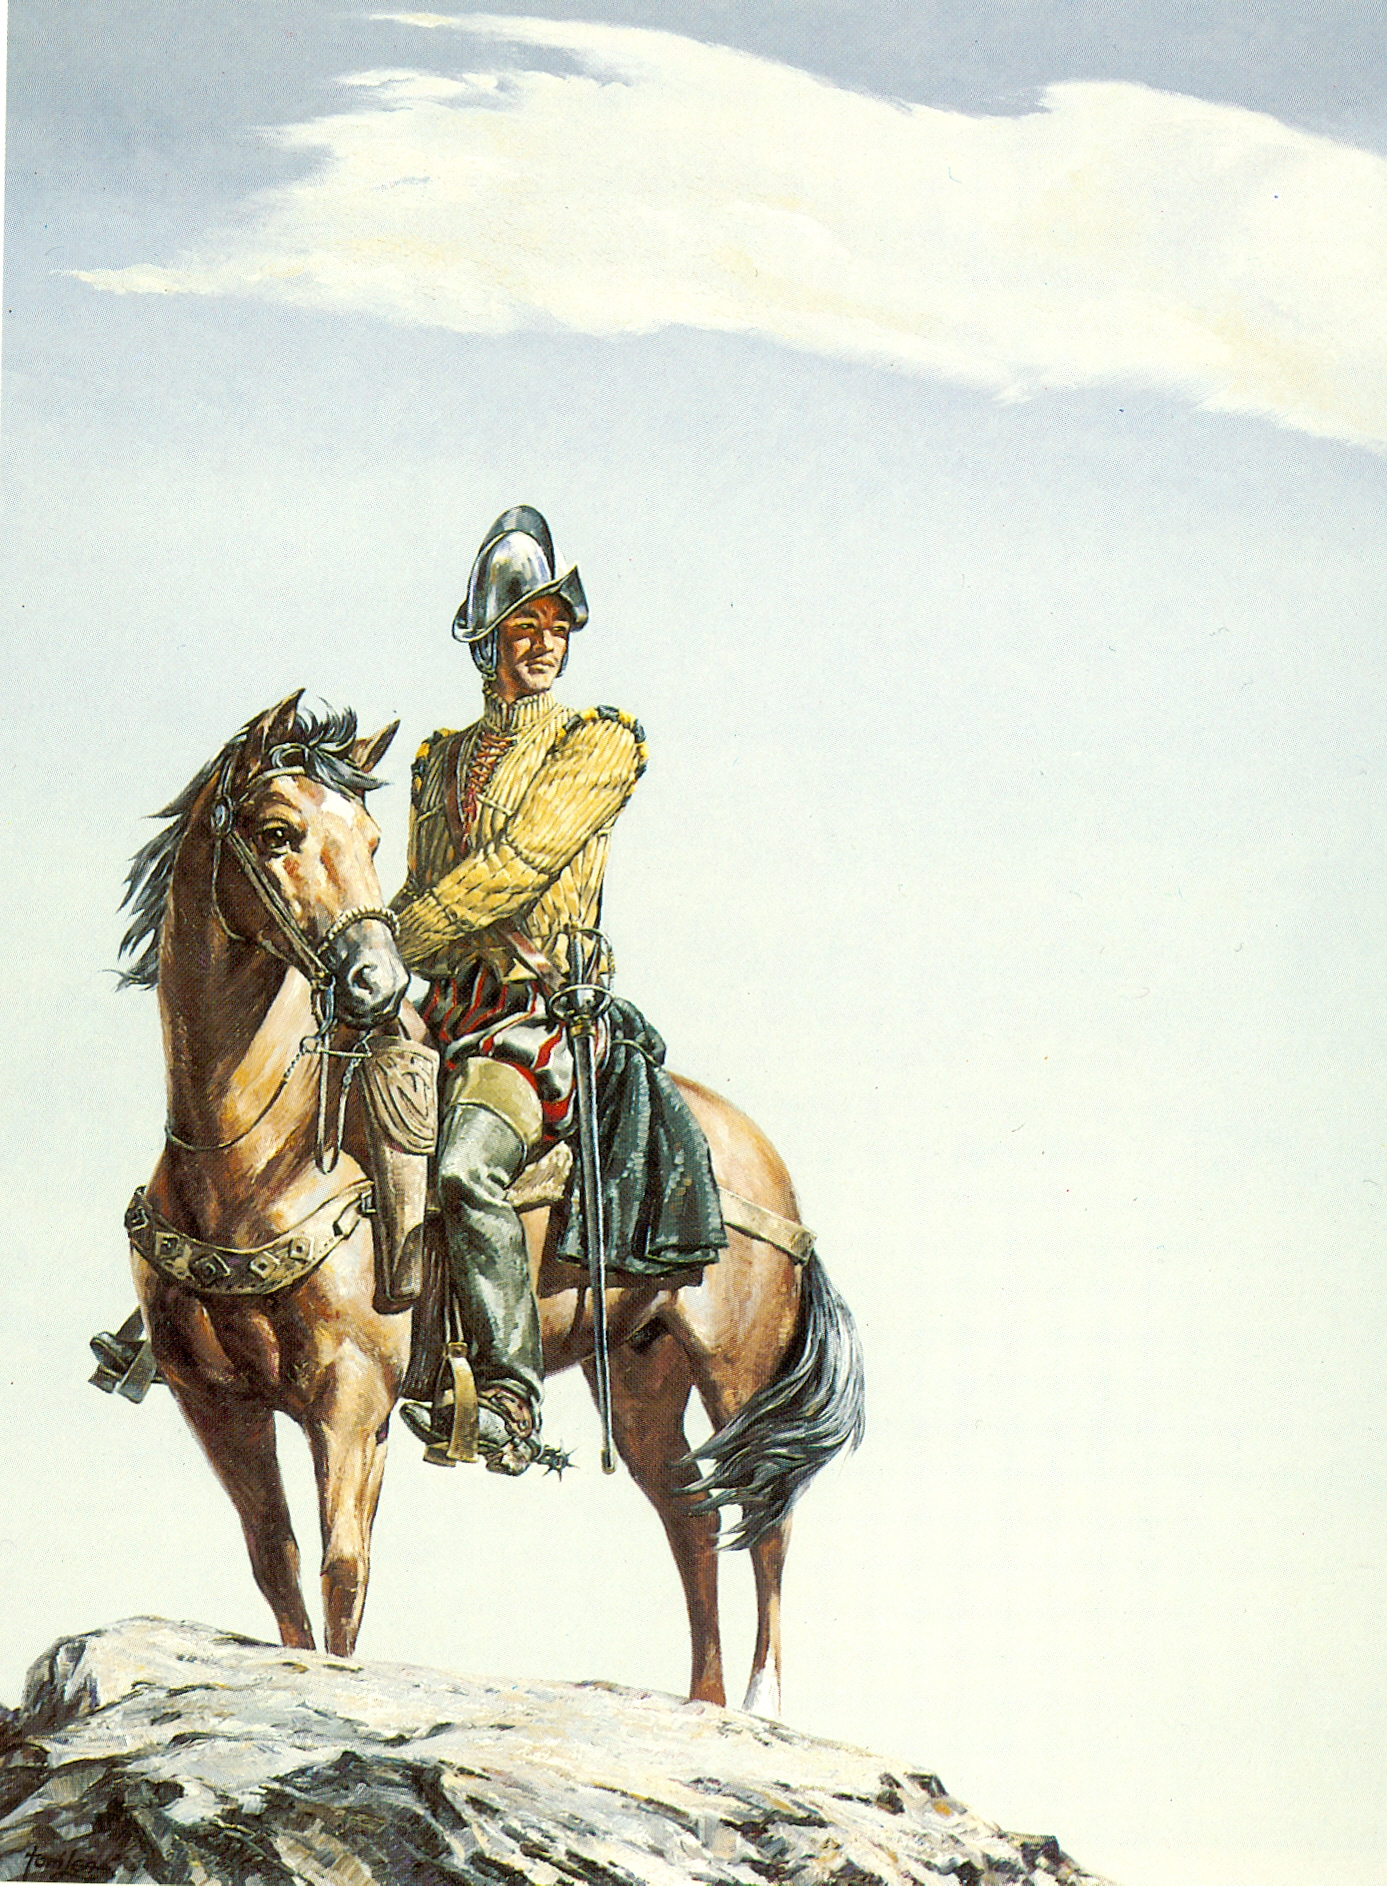 Toribio; Conquistador, Tom Lea ©1962. Oil on canvas, 42 X 32. Collection of Mr. and Mrs. Charles H. Leavell, Cover illustration for the book The Hands of Cantu
Image courtesy of The Tom Lea Institute  